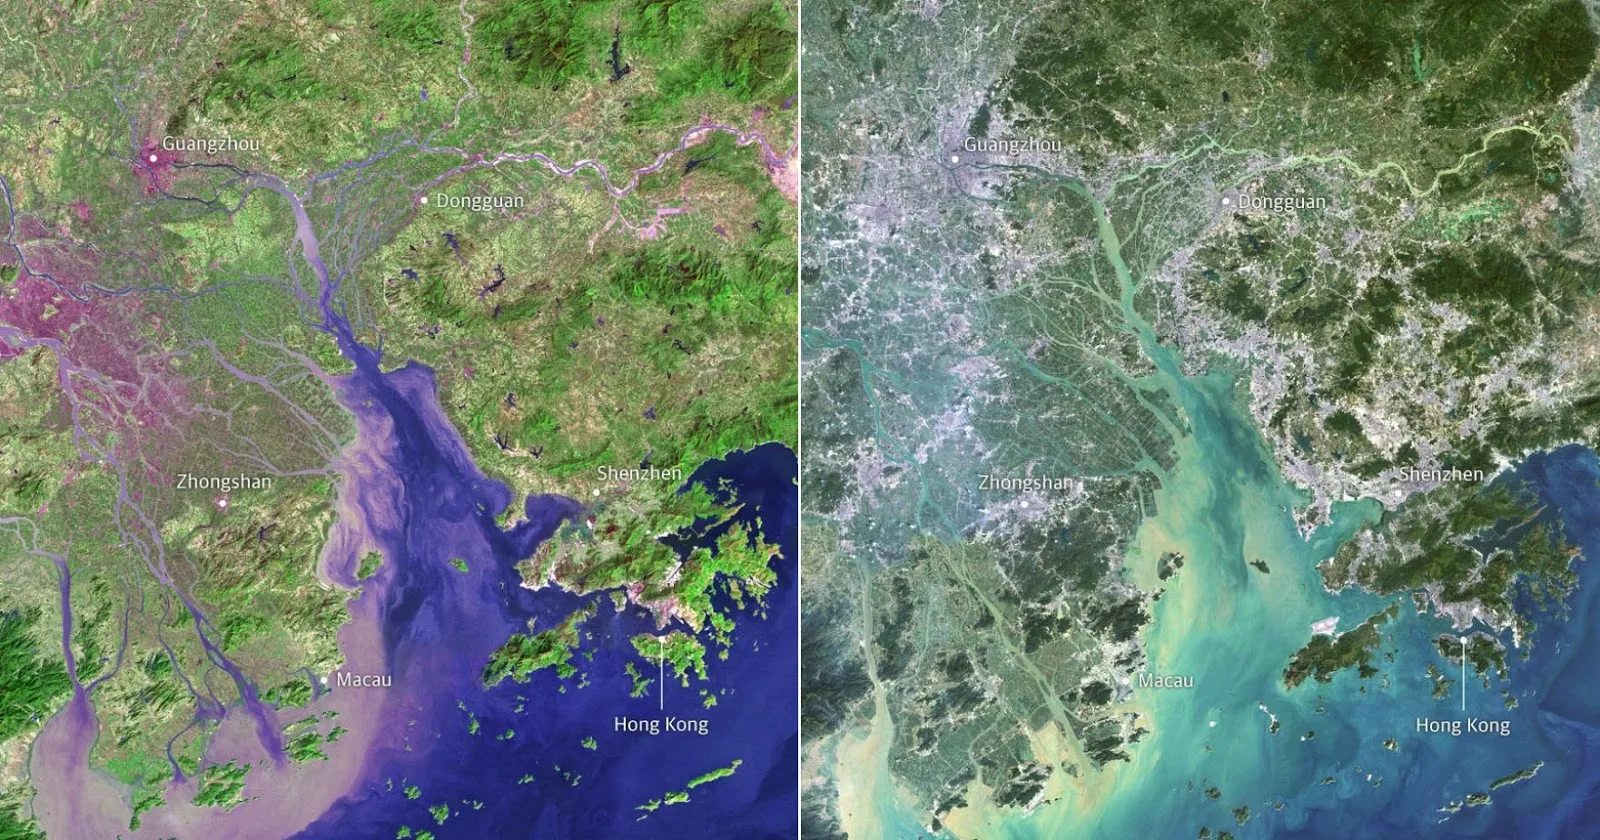 The Pearl River Delta in 1979 and 2000.